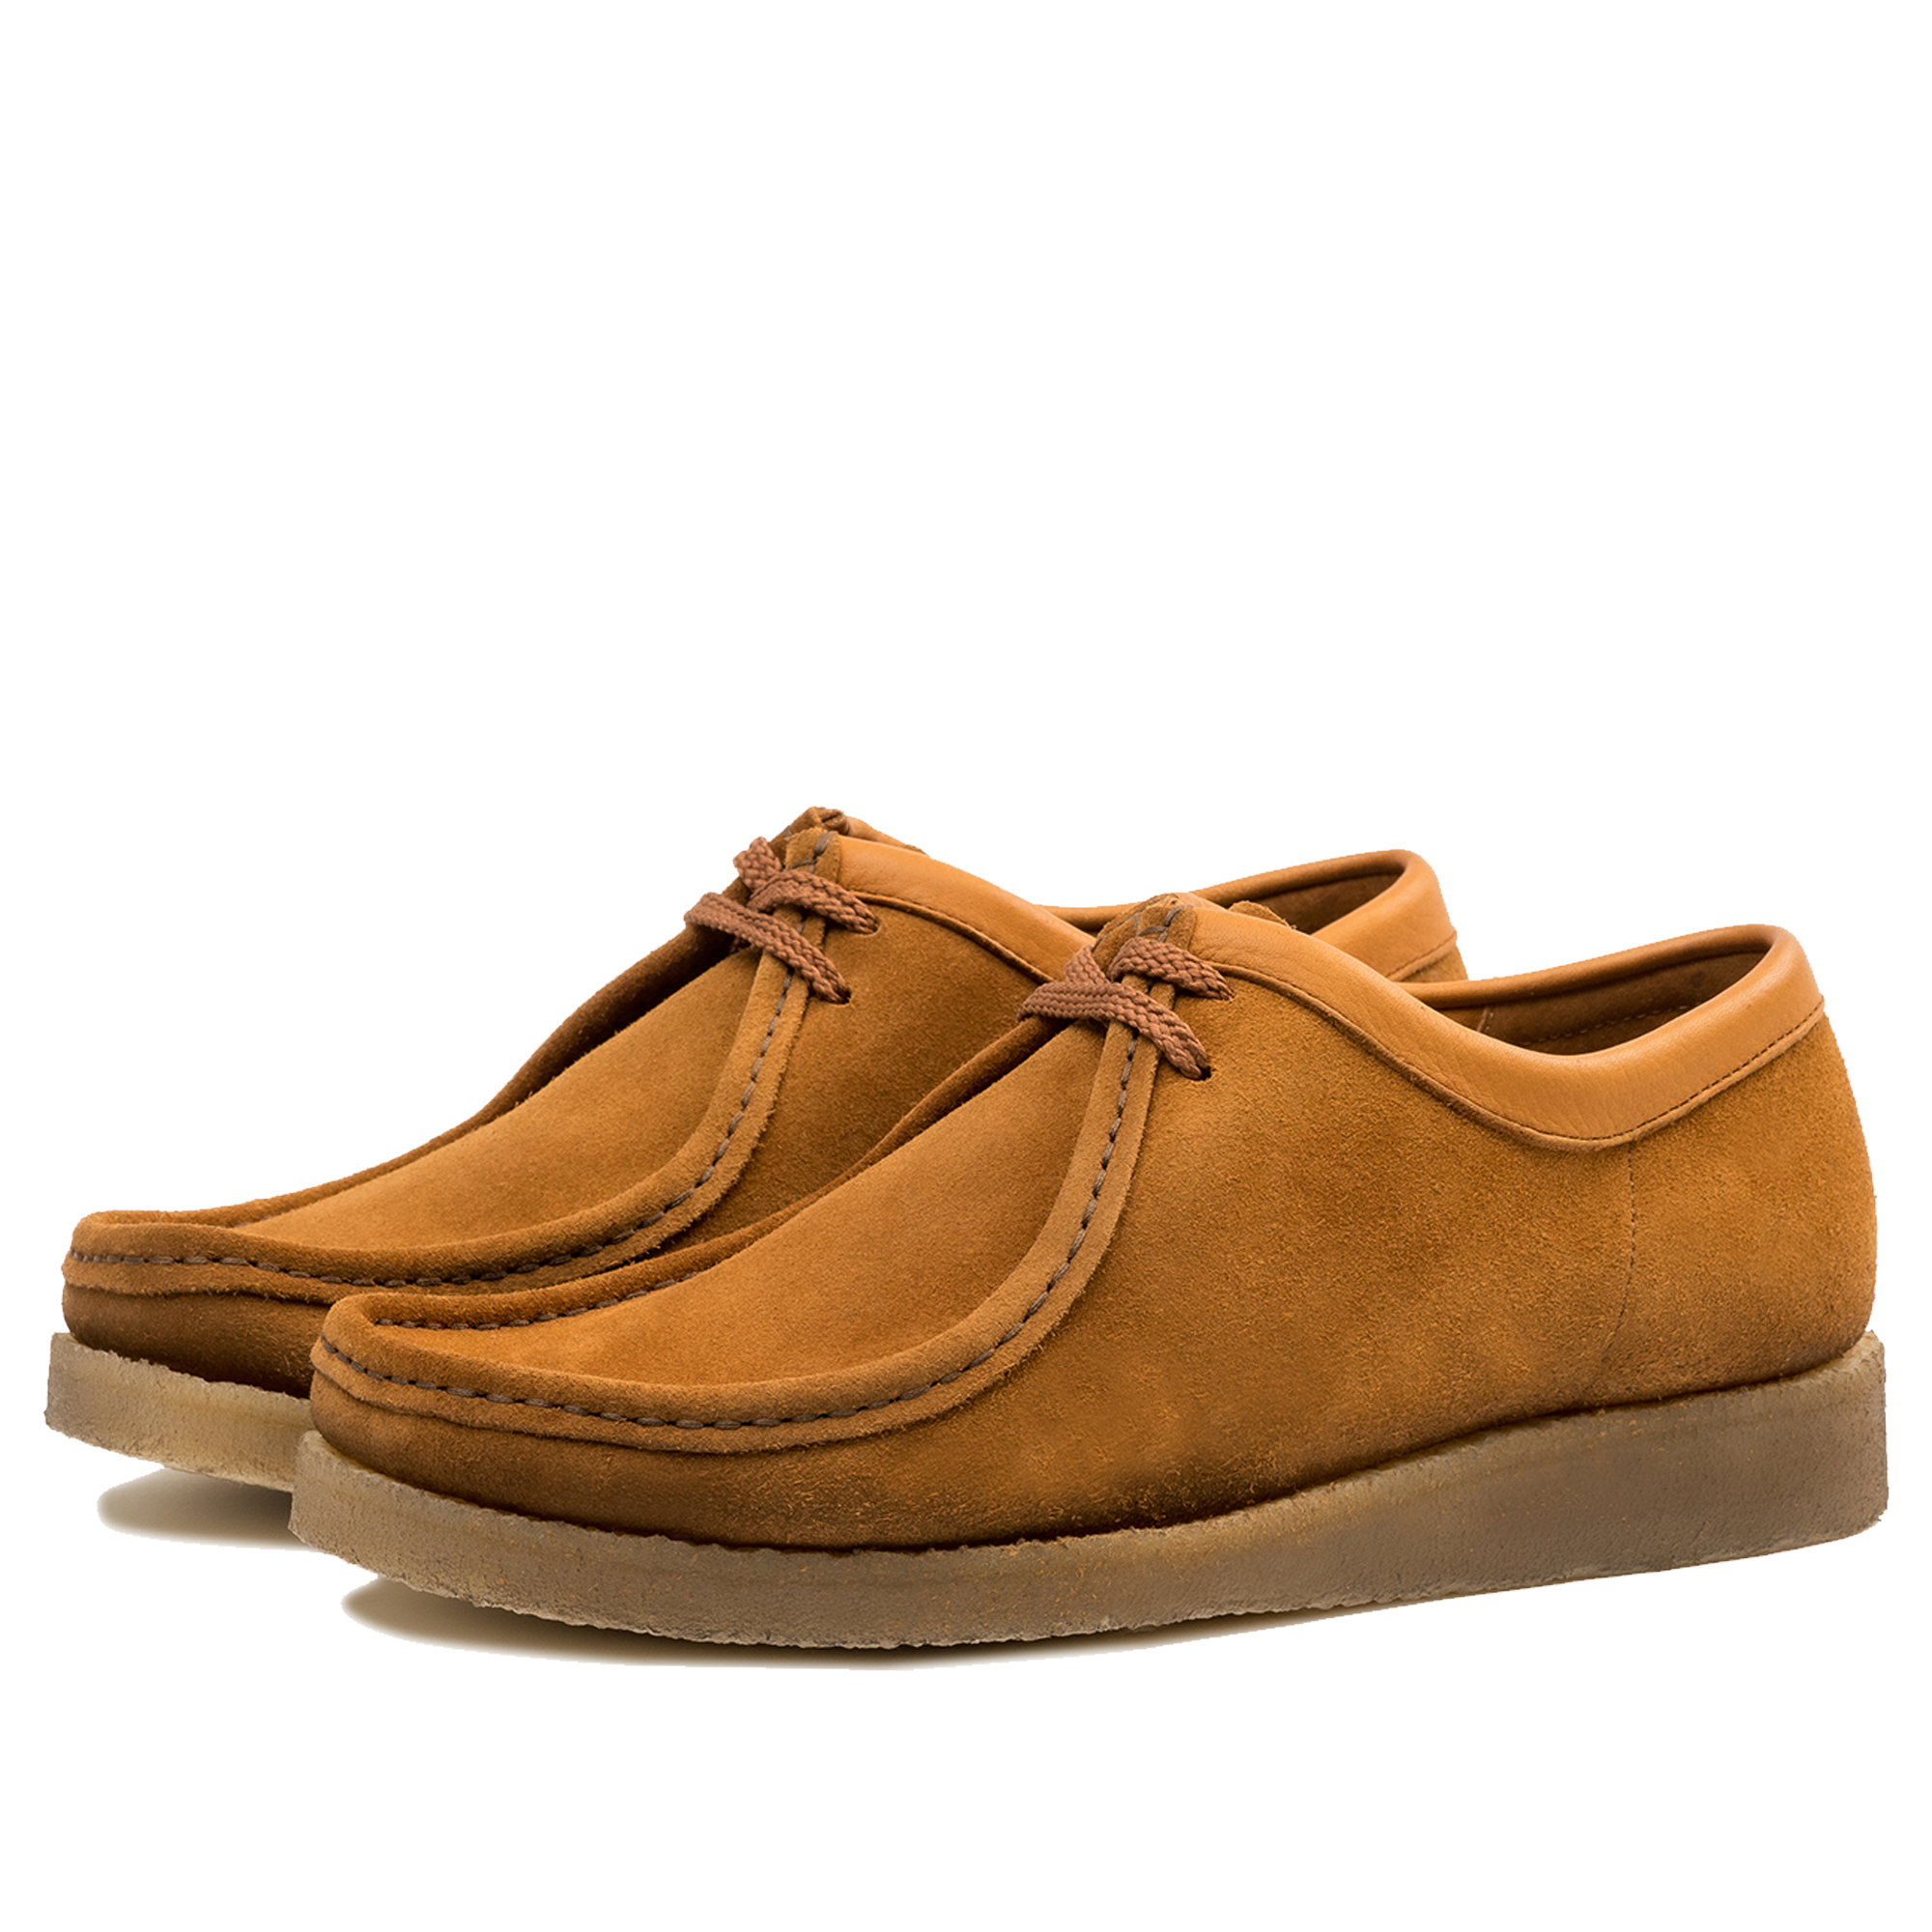 P204 The Original Padmore & Barnes Iconic Style - Discovery Cognac Suede